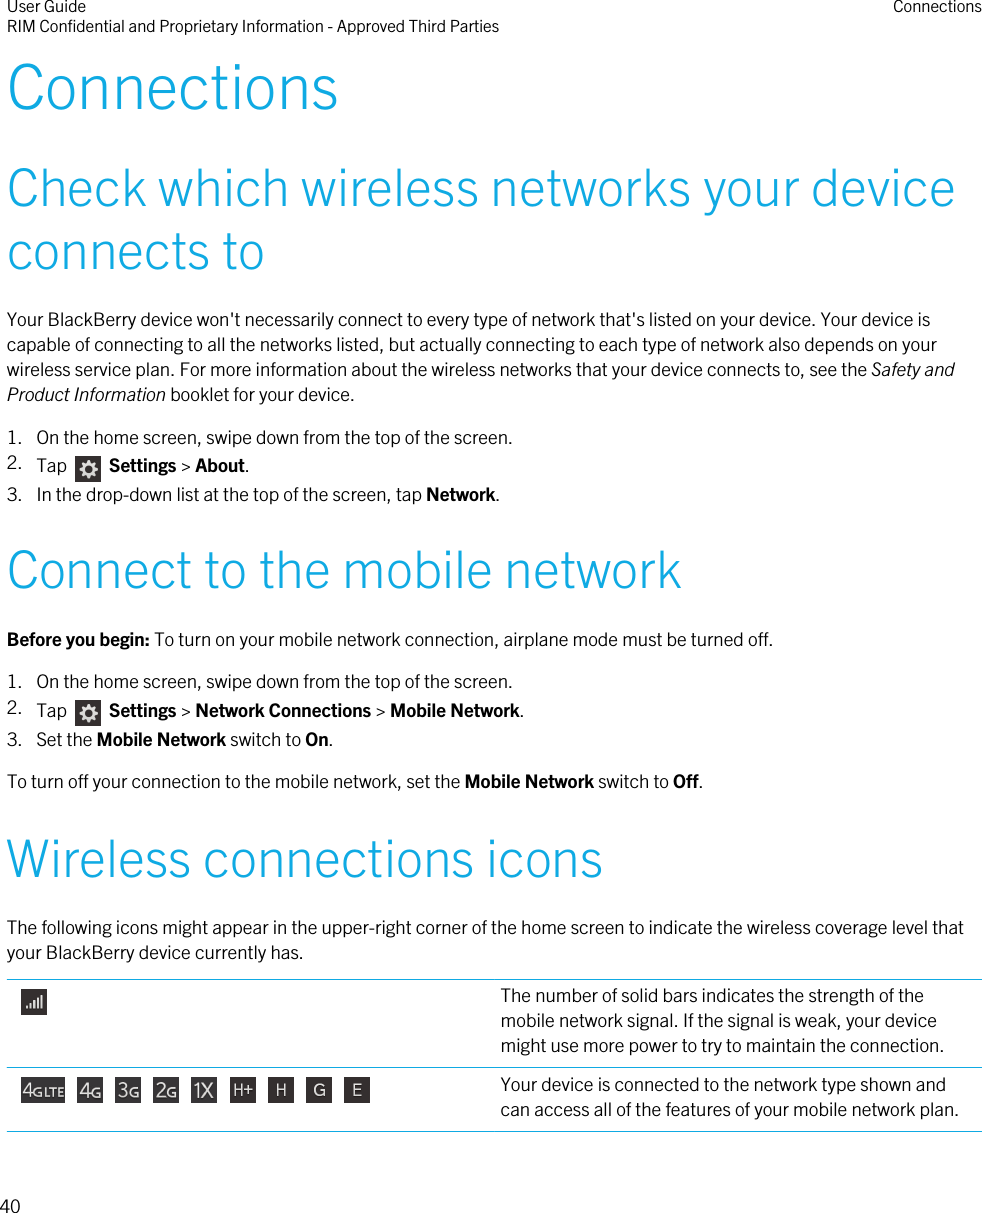 ConnectionsCheck which wireless networks your deviceconnects toYour BlackBerry device won&apos;t necessarily connect to every type of network that&apos;s listed on your device. Your device iscapable of connecting to all the networks listed, but actually connecting to each type of network also depends on yourwireless service plan. For more information about the wireless networks that your device connects to, see the Safety andProduct Information booklet for your device.1. On the home screen, swipe down from the top of the screen.2. Tap   Settings &gt; About.3. In the drop-down list at the top of the screen, tap Network.Connect to the mobile networkBefore you begin: To turn on your mobile network connection, airplane mode must be turned off.1. On the home screen, swipe down from the top of the screen.2. Tap    Settings &gt; Network Connections &gt; Mobile Network.3. Set the Mobile Network switch to On.To turn off your connection to the mobile network, set the Mobile Network switch to Off.Wireless connections iconsThe following icons might appear in the upper-right corner of the home screen to indicate the wireless coverage level thatyour BlackBerry device currently has. The number of solid bars indicates the strength of themobile network signal. If the signal is weak, your devicemight use more power to try to maintain the connection.                  Your device is connected to the network type shown andcan access all of the features of your mobile network plan.User GuideRIM Confidential and Proprietary Information - Approved Third Parties Connections40